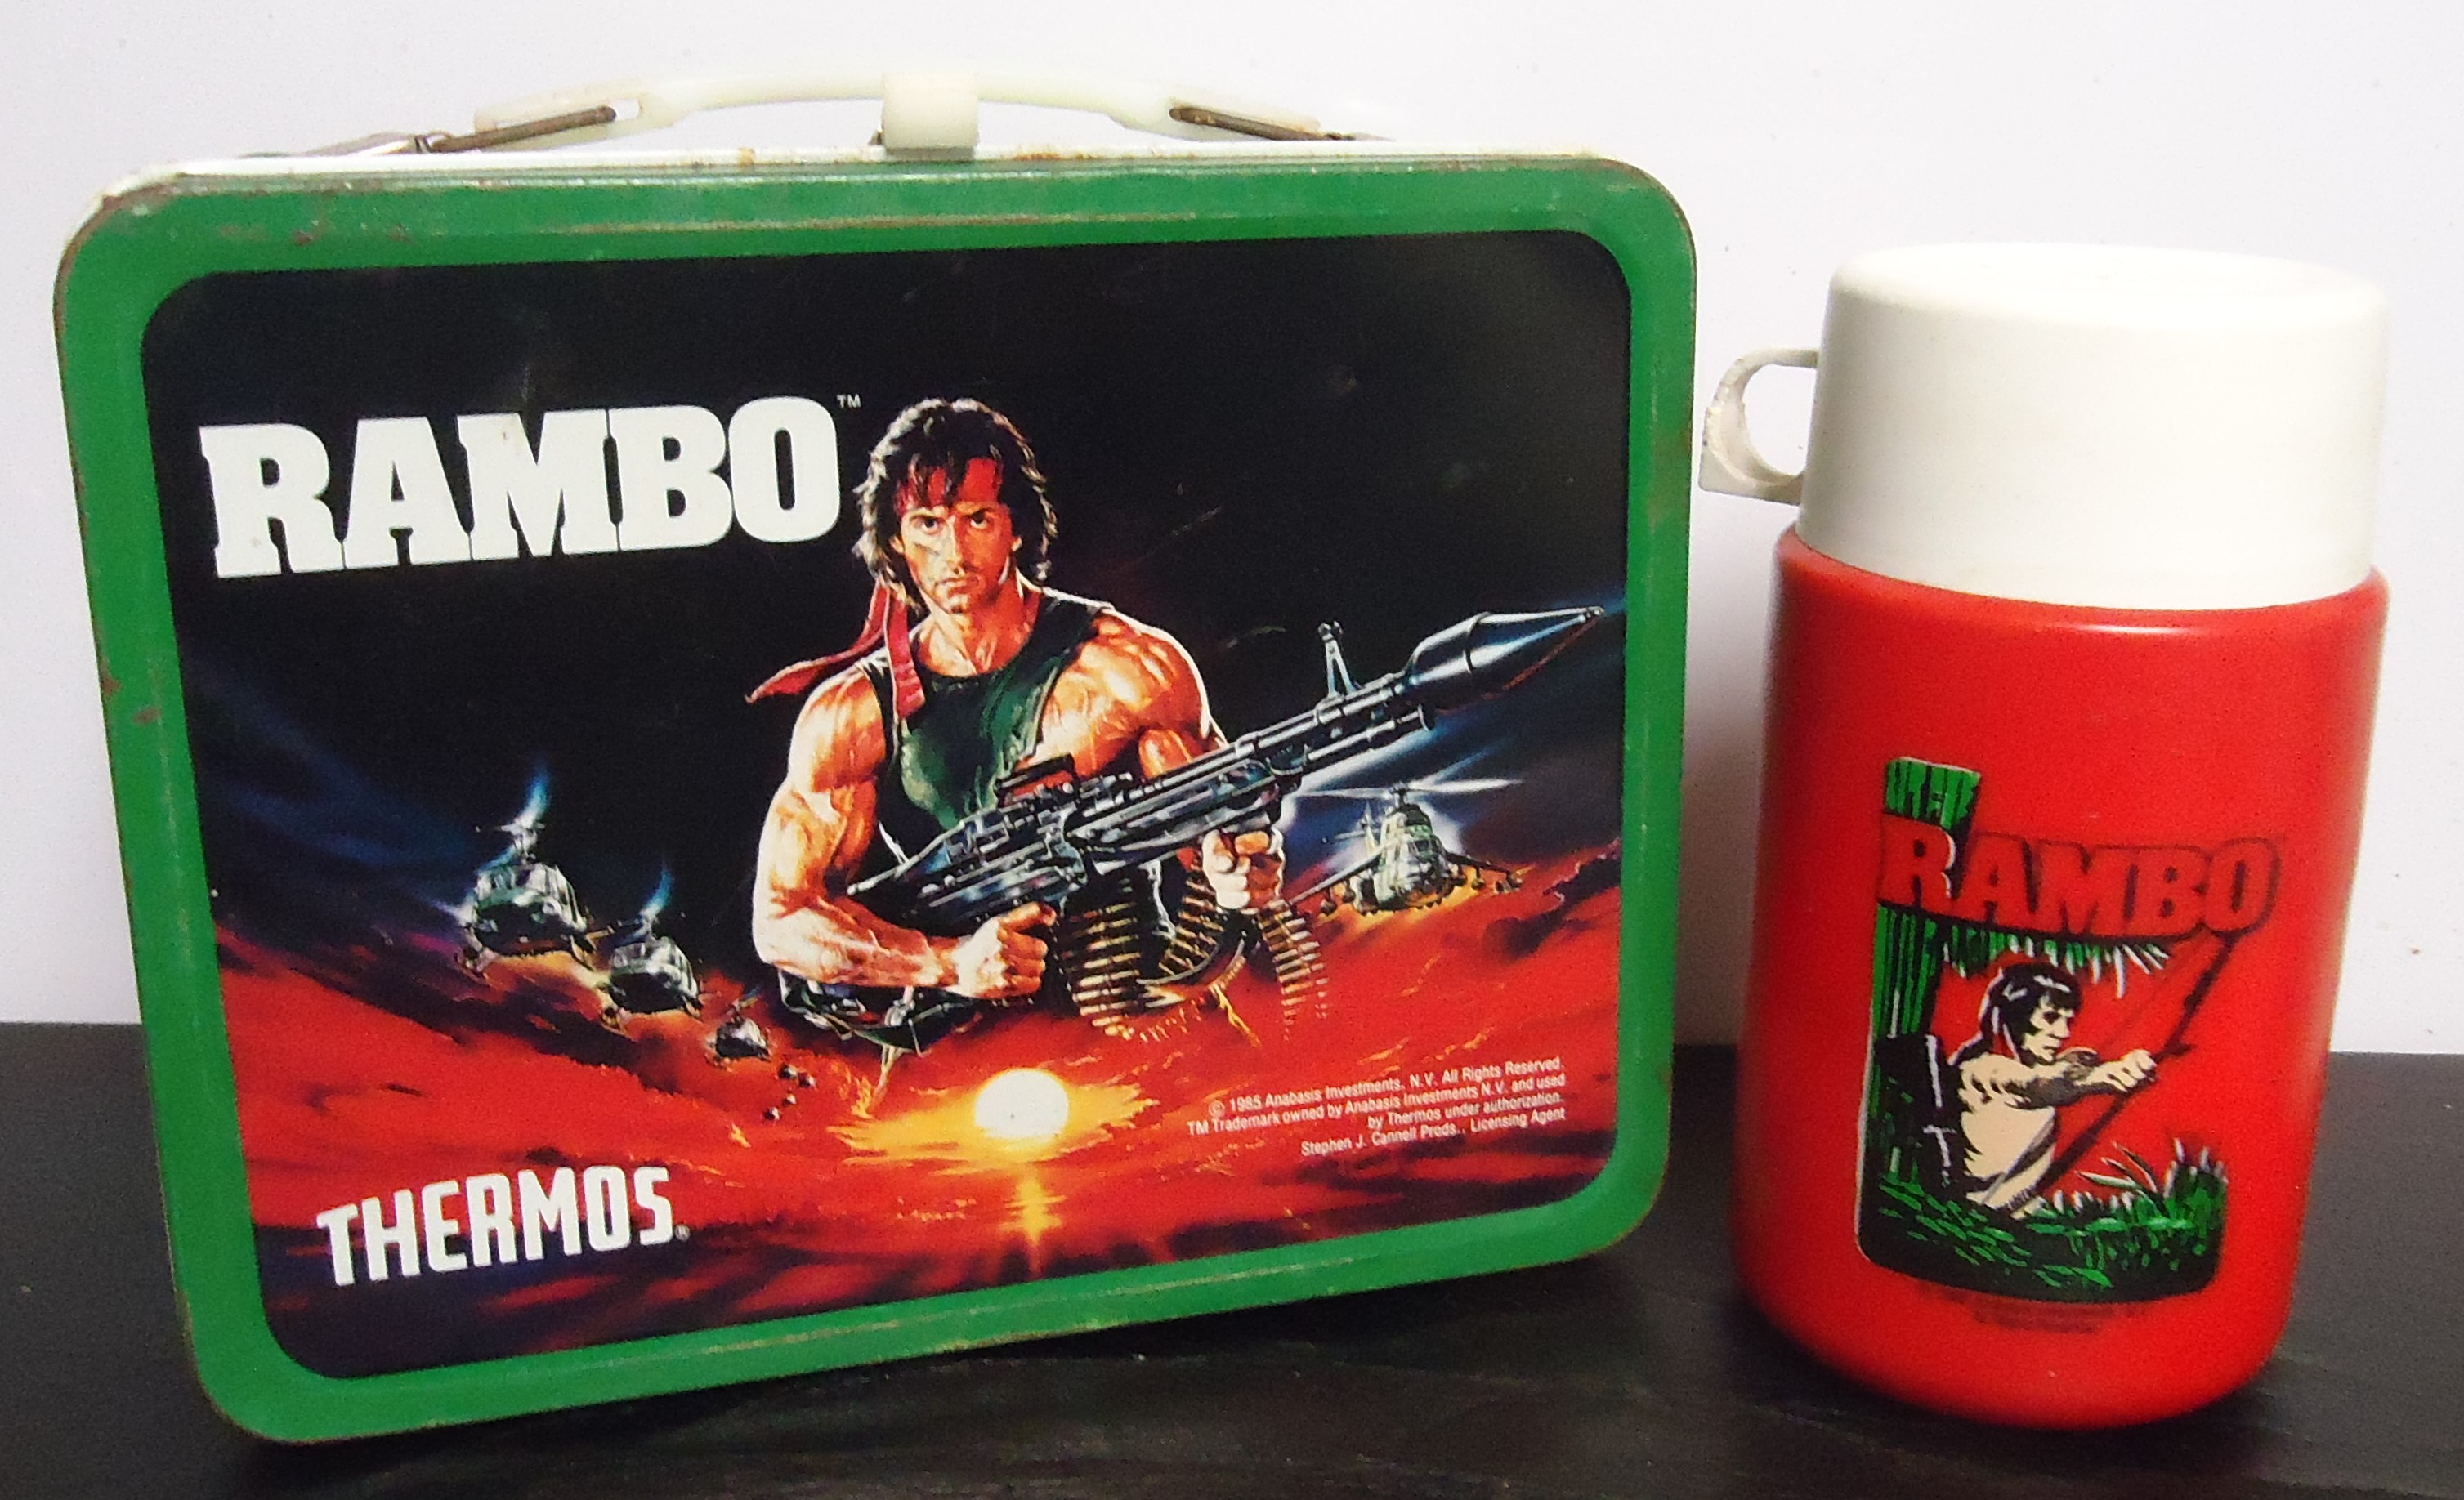 (3) "Rambo" Metal Lunch Box
W/ Thermos
$55.00